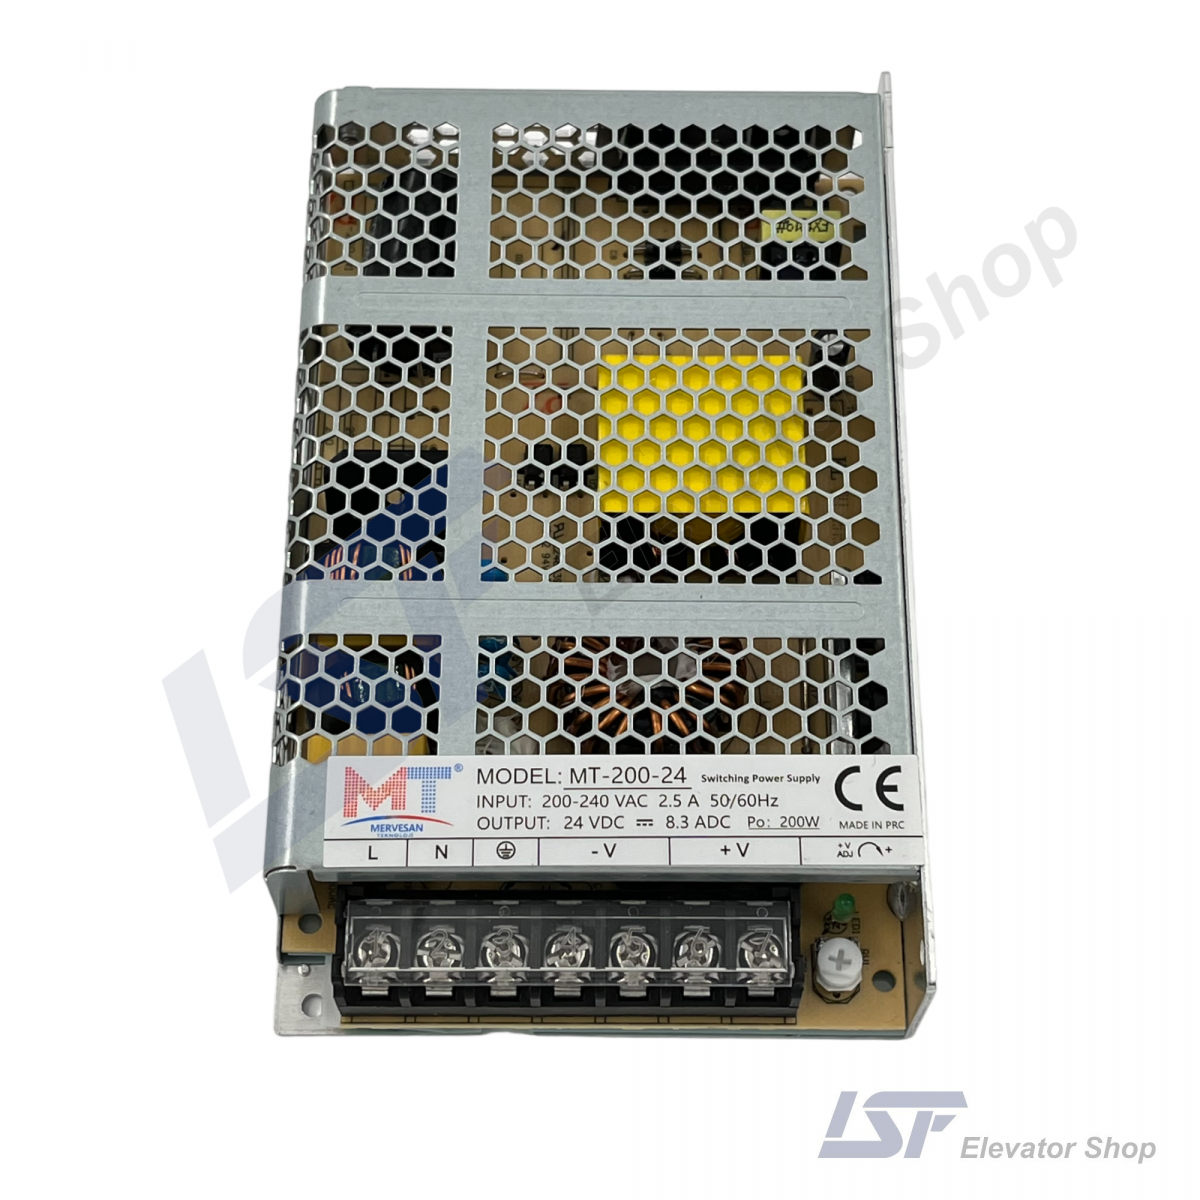 Switching Power Supply MT-200-24 for Elevator (1)